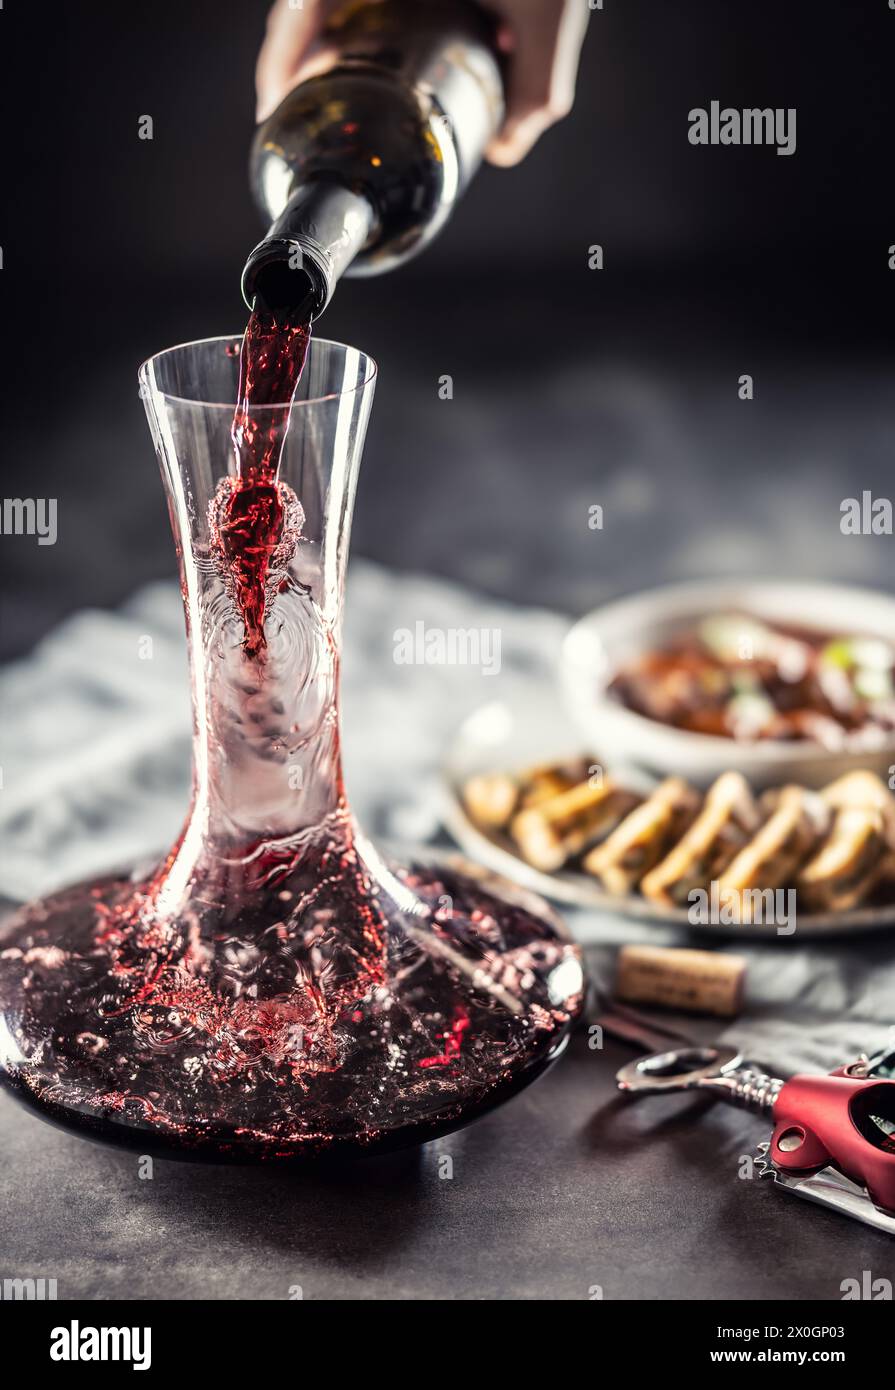 Red wine is poured from a bottle into a carafe on a table on which there is venison, Hungarian or Viennese goulash with Karlovy Vary dumplings. Stock Photo